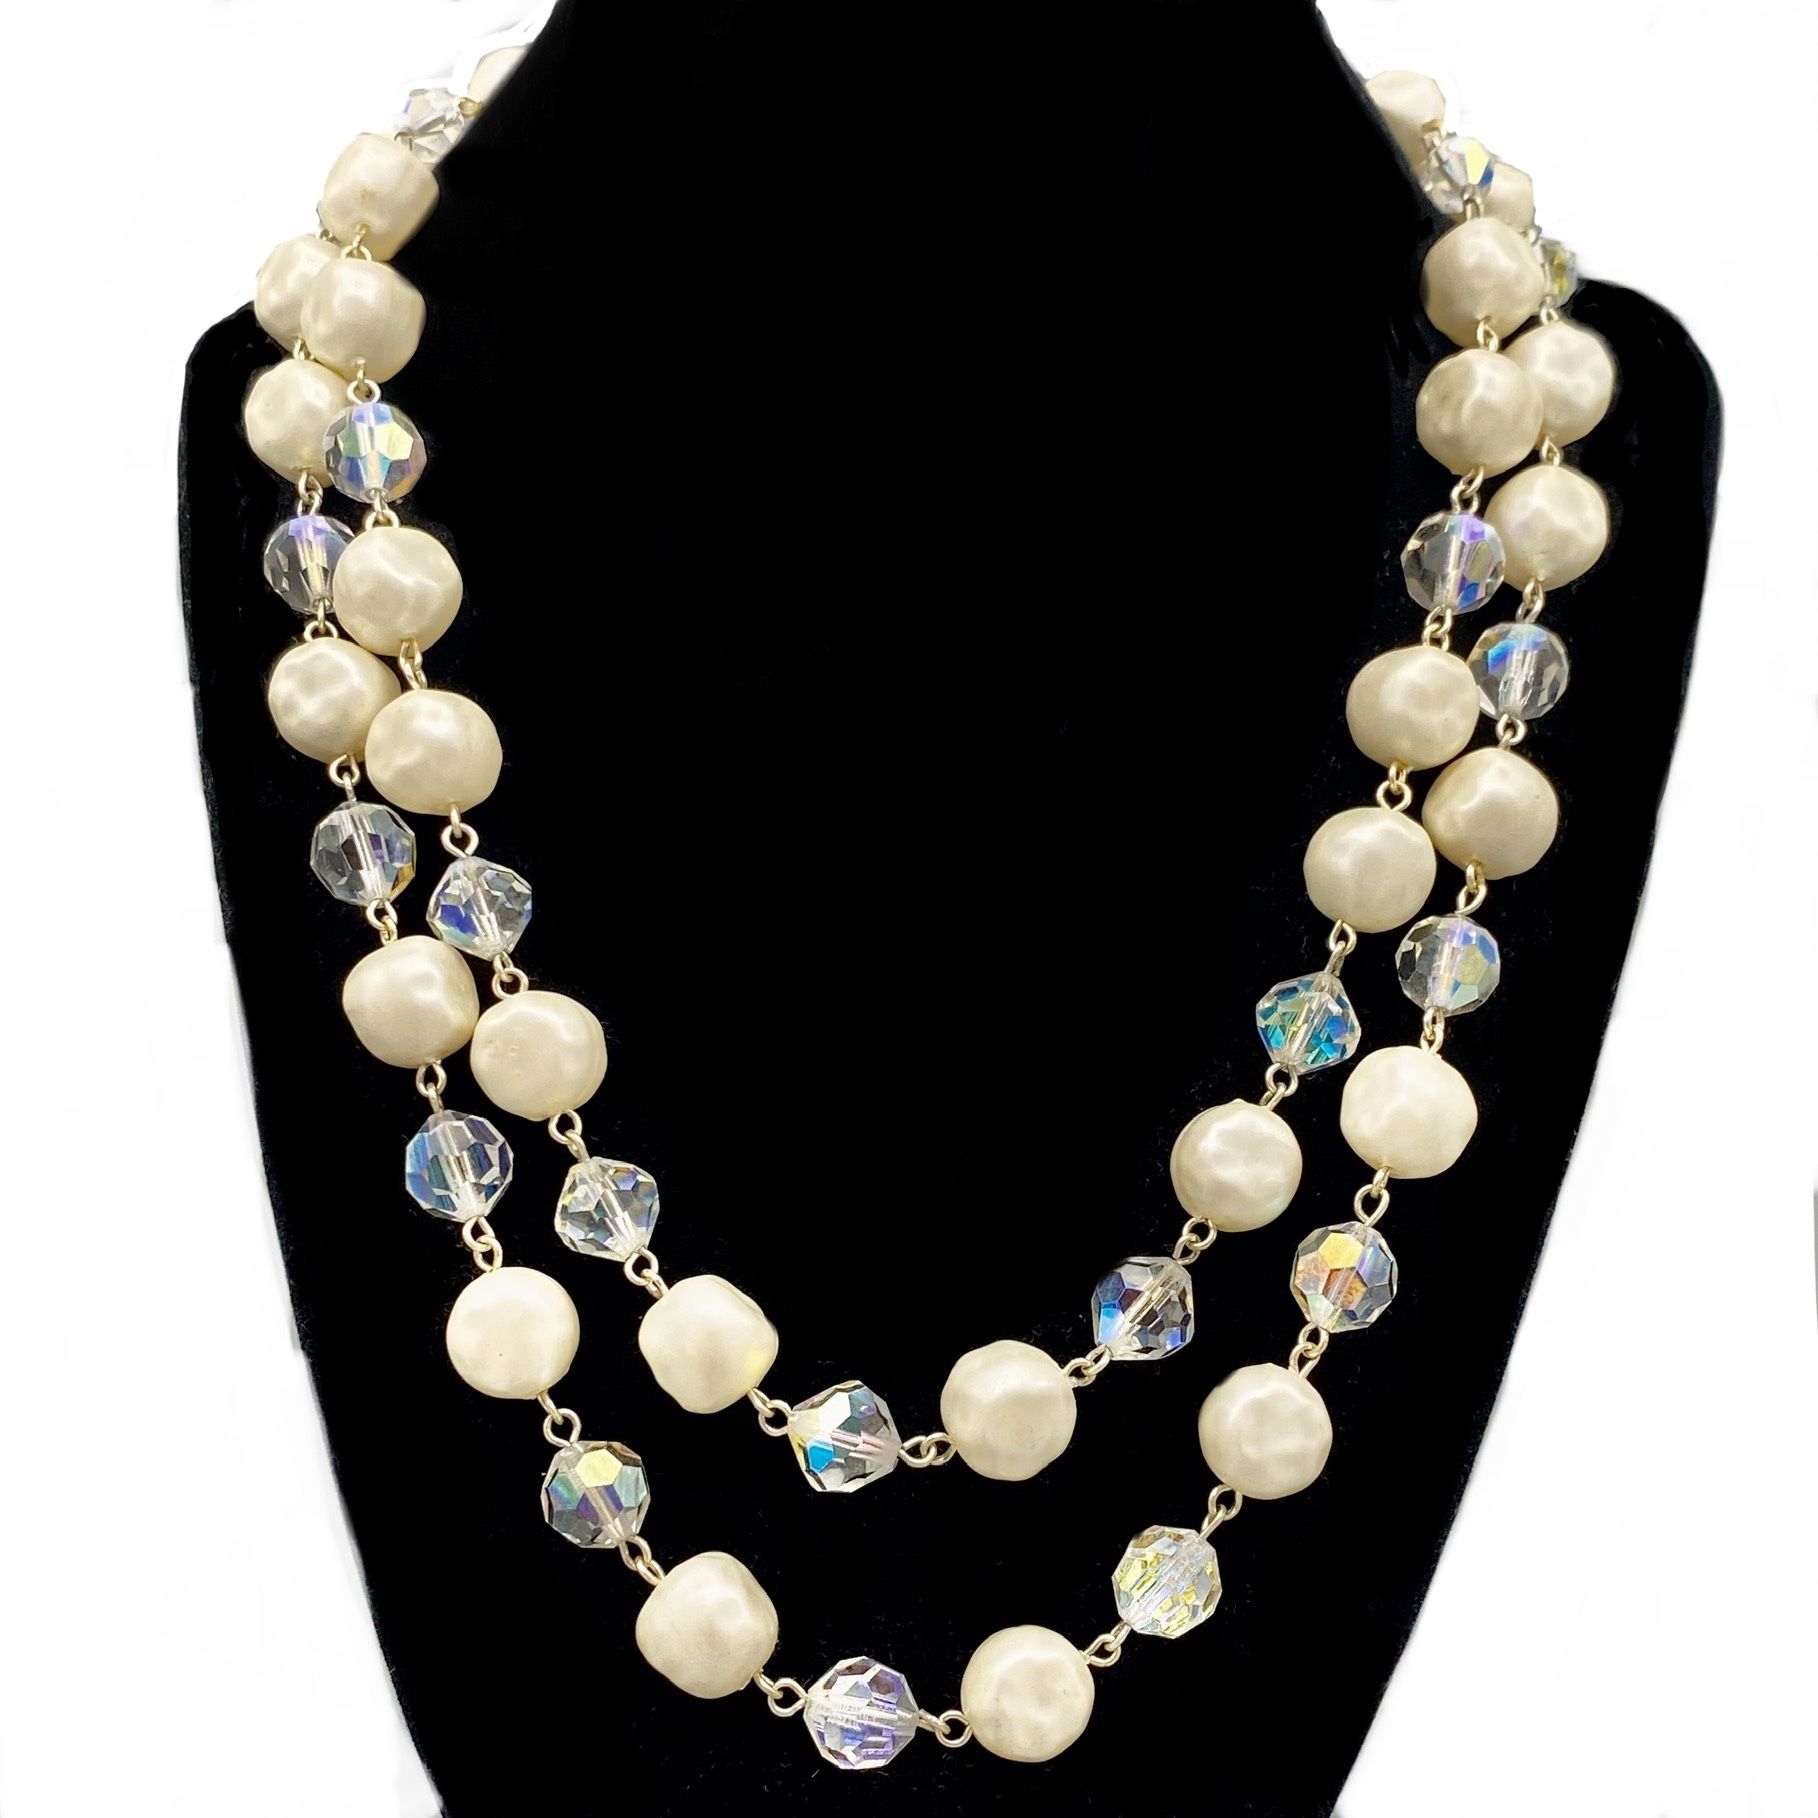 Vintage 1950s Japan Double Stand Repeating Large Simulated Cream Pearls Round Faceted Clear AB Crystal Beads Choker Necklace, Bridal Jewelry